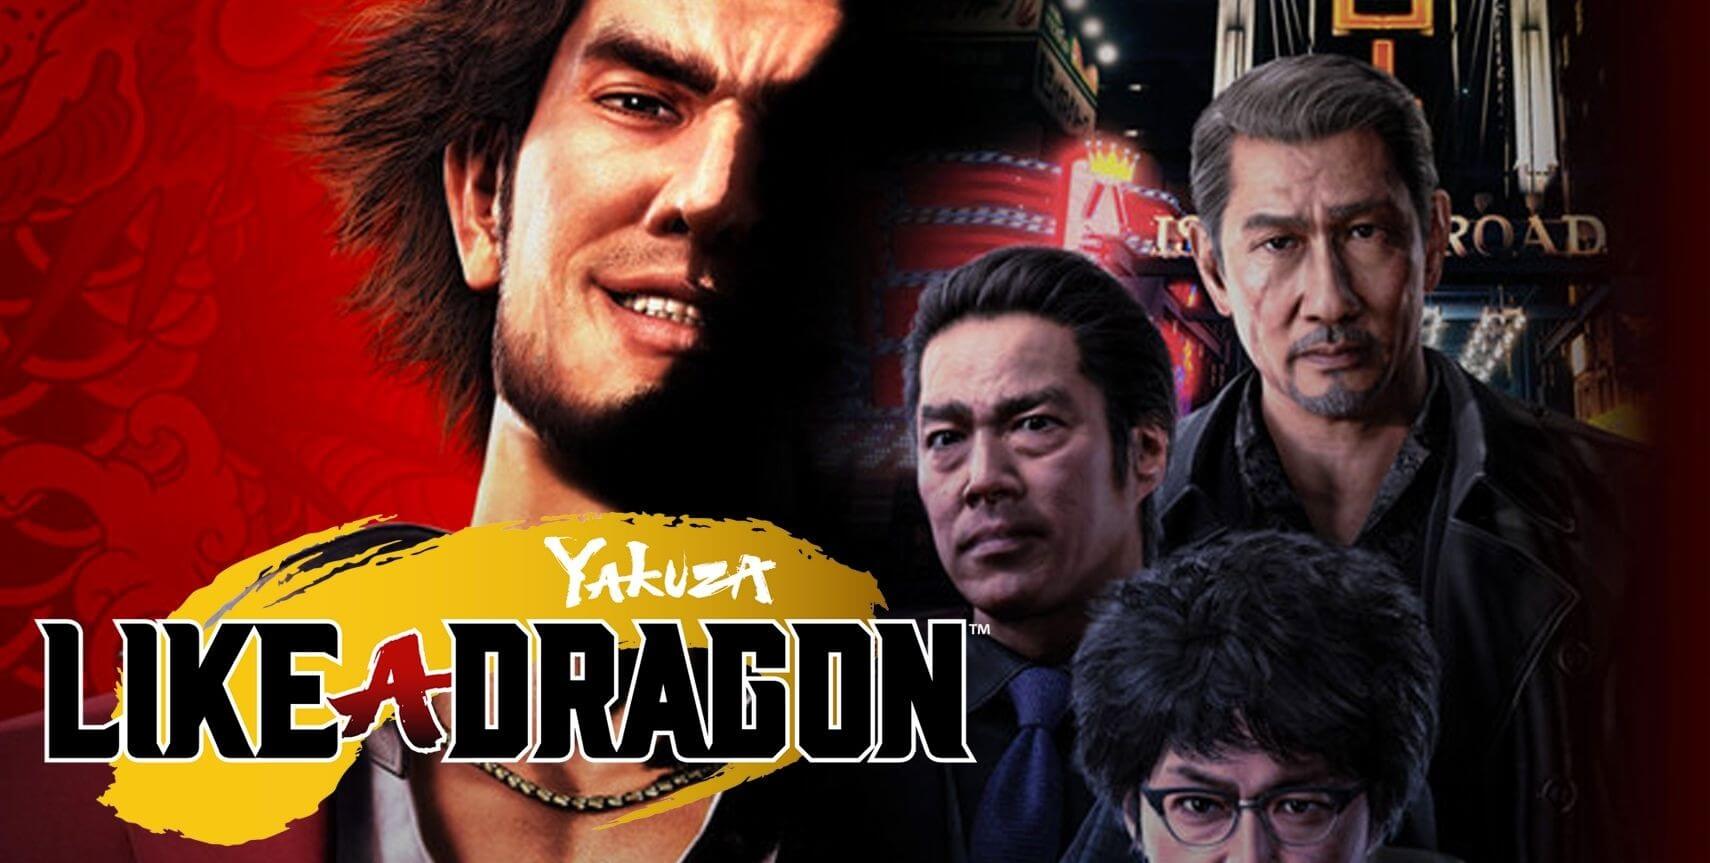 The Quest Begins trailer released for Yakuza: Like a Dragon